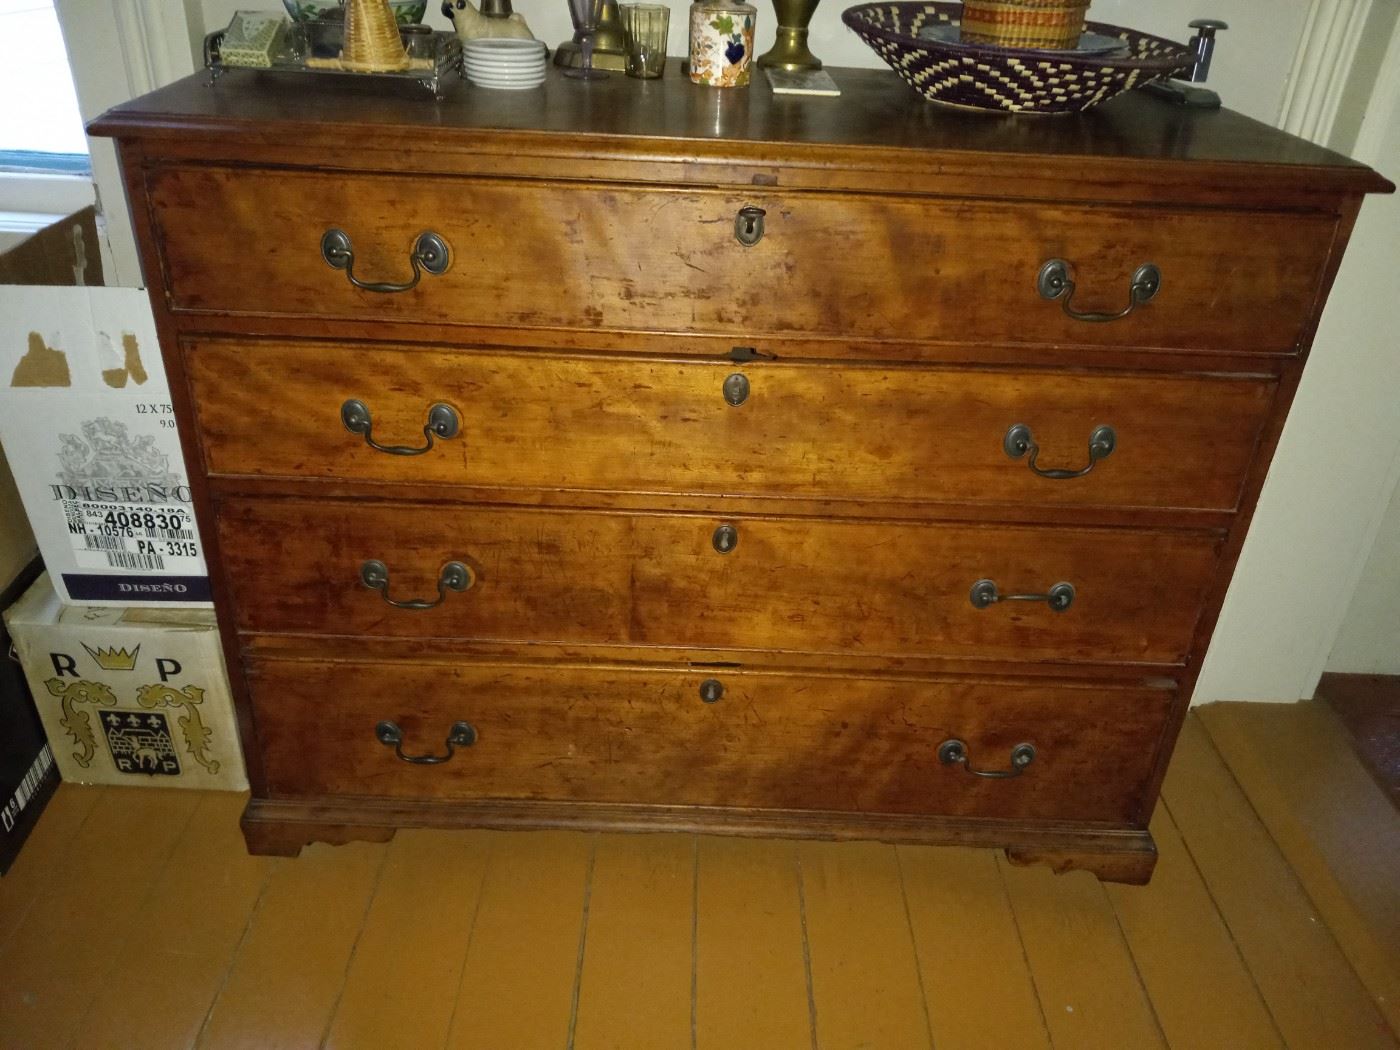 Period Chippendale chest of drawers